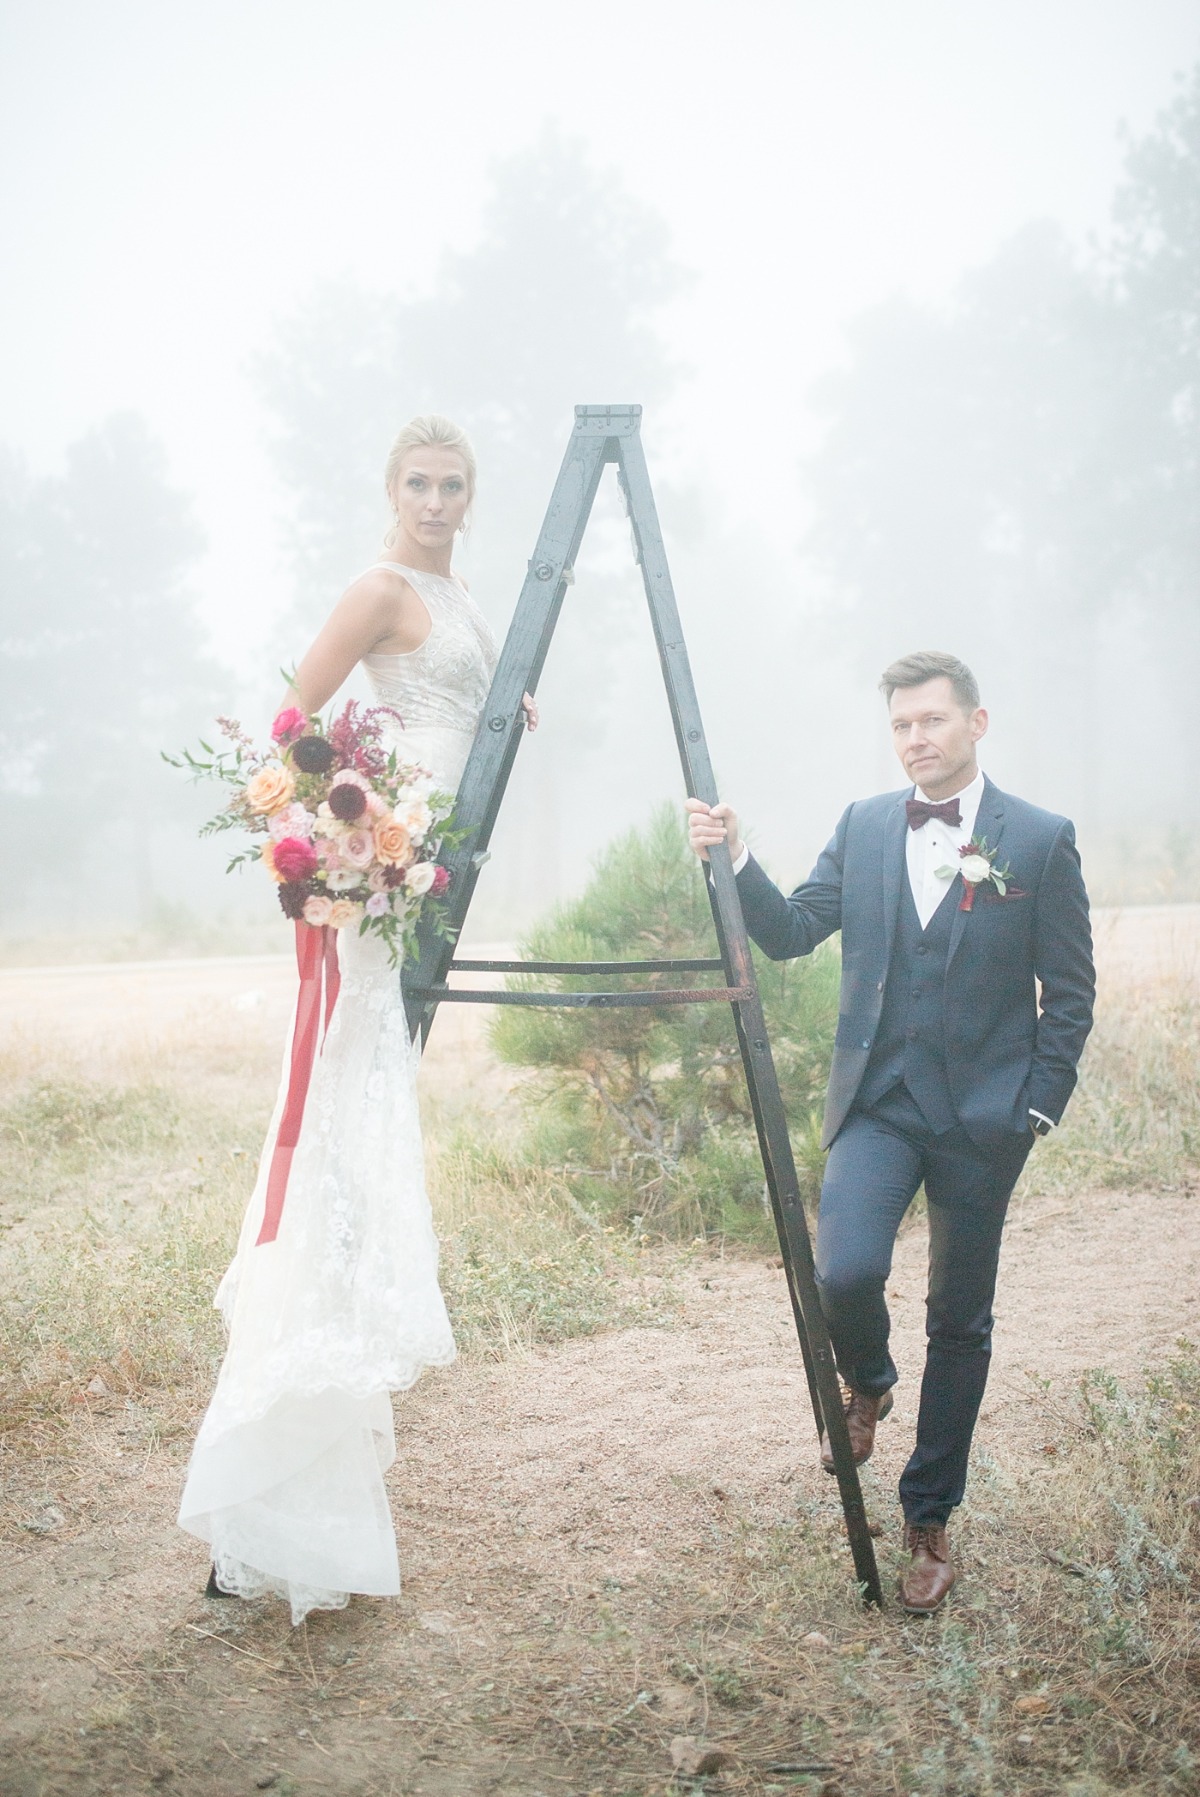 Misty Wedding Inspiration in the Mountains